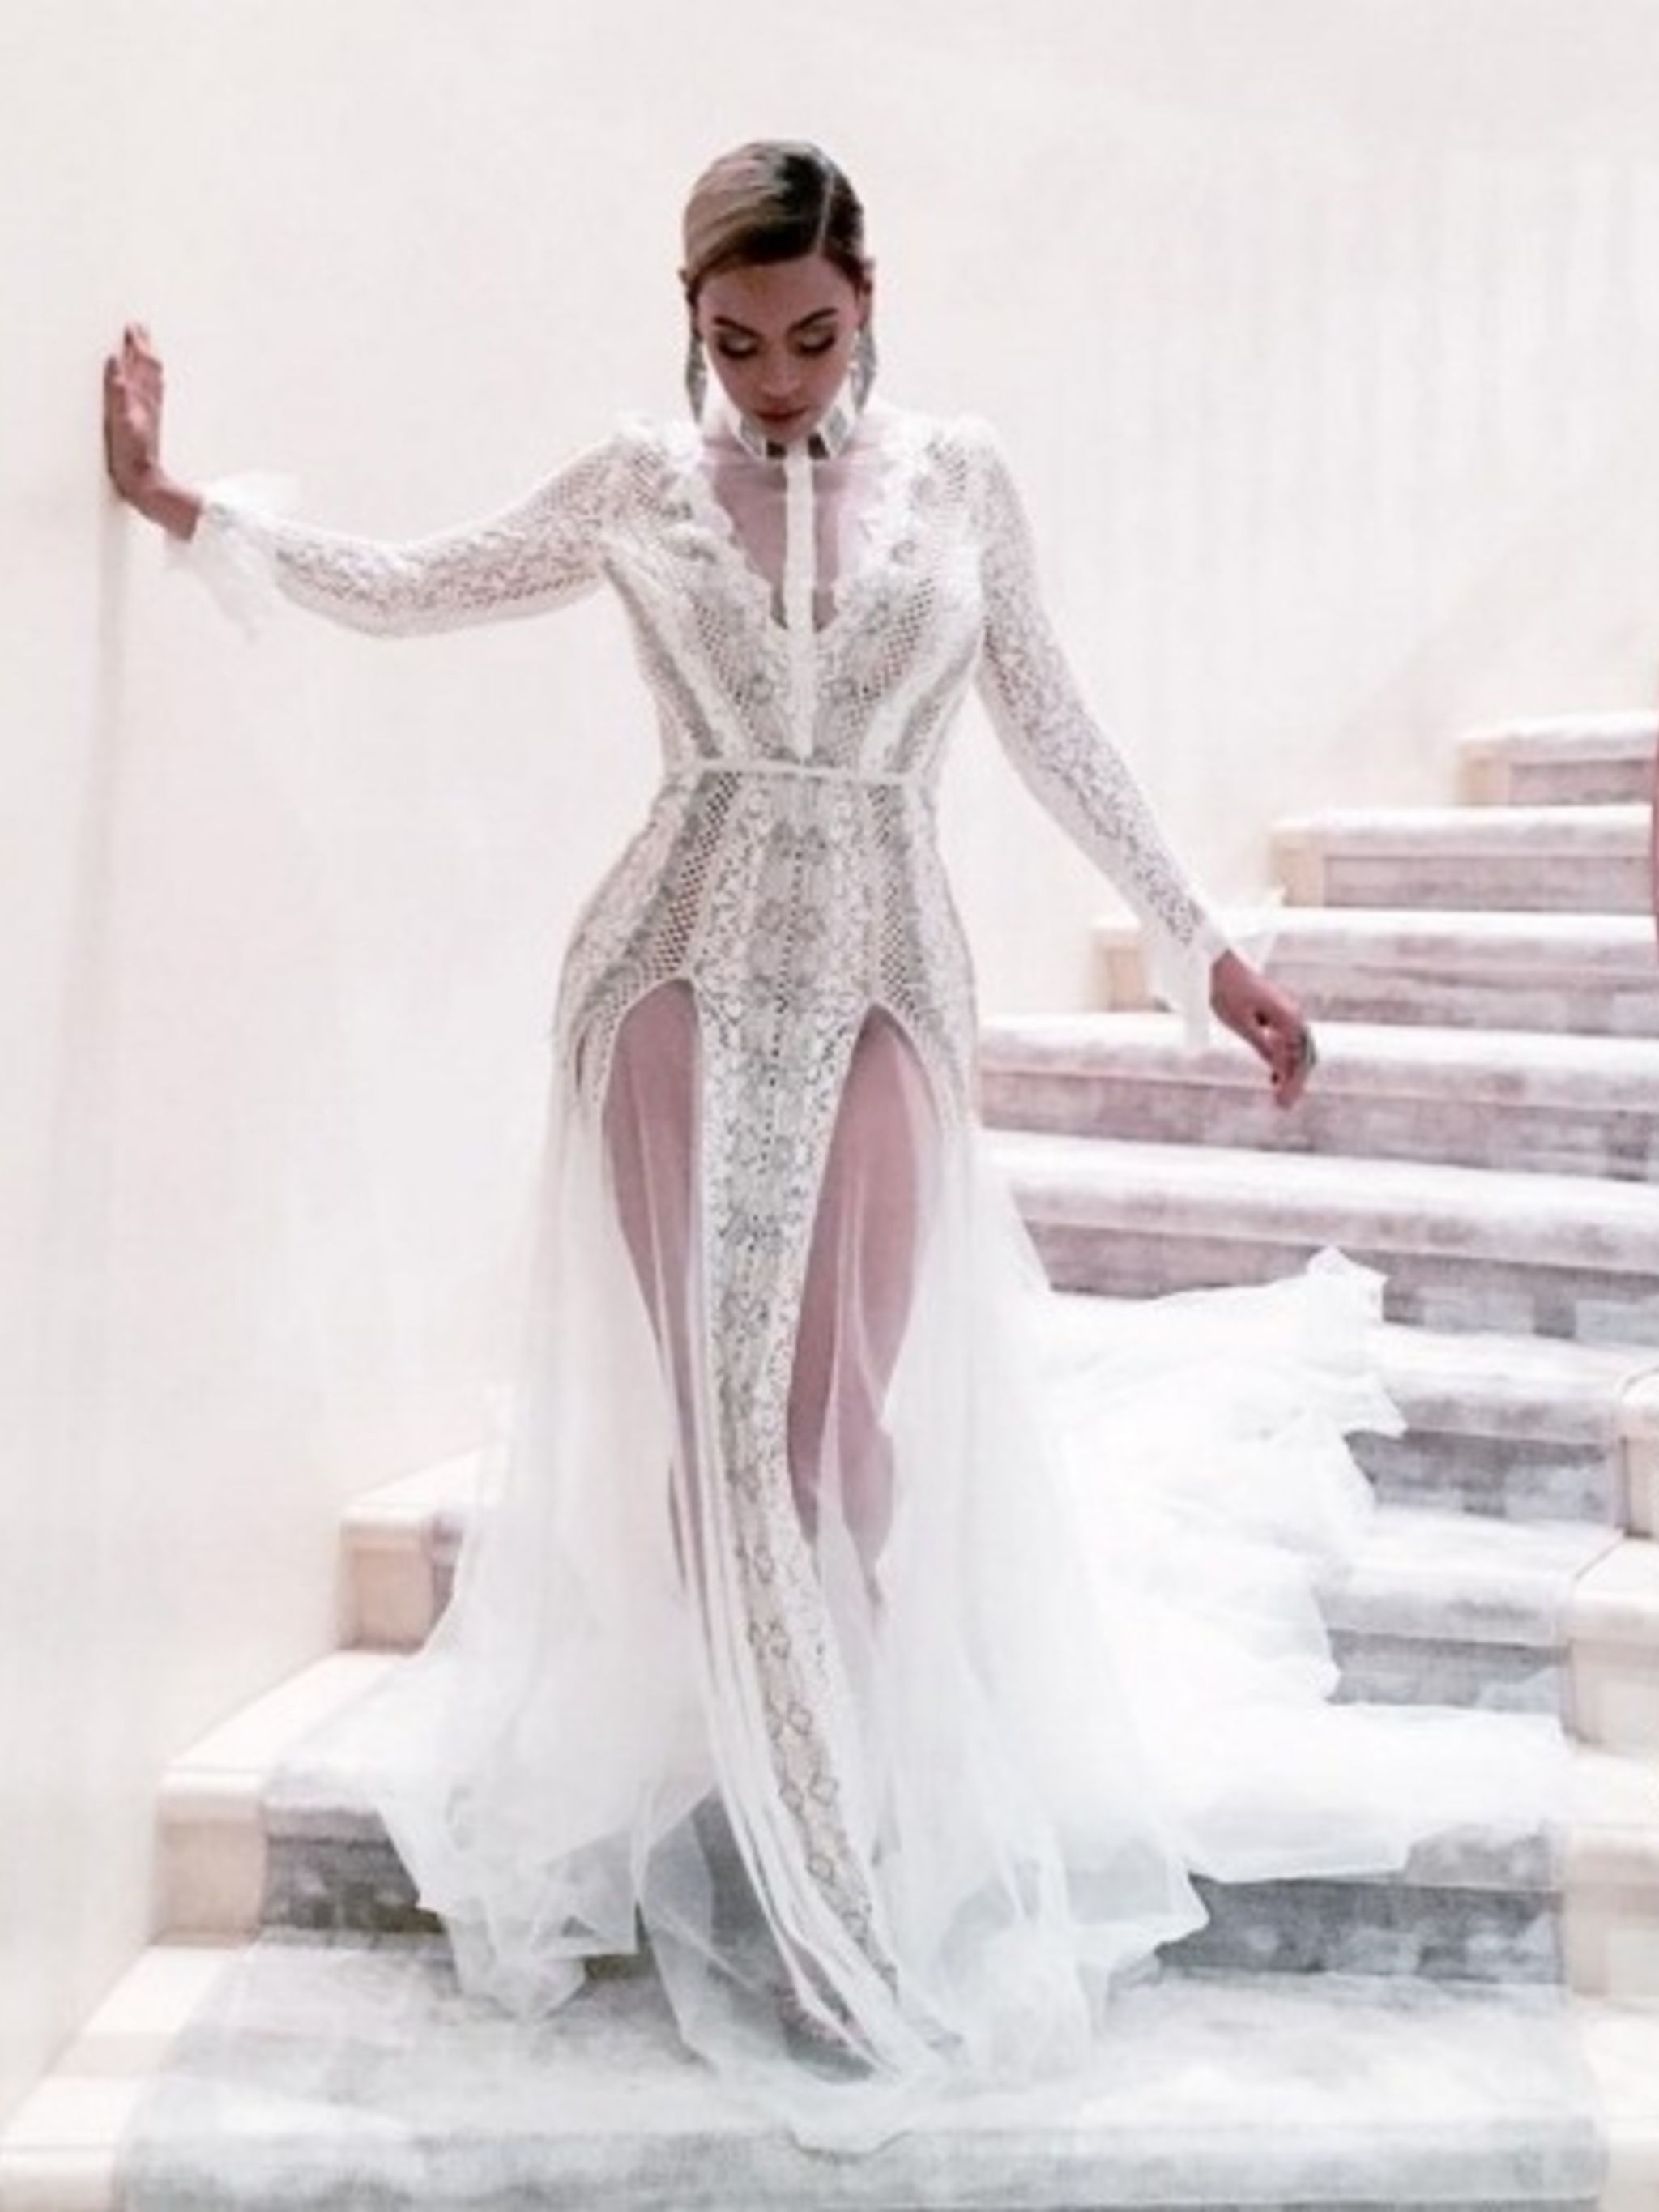 Beyoncé Wore the Coolest Wedding Gown for Her Vow Renewal with Jay-Z | Vow  renewal dress, Celebrity dresses, Celebrity wedding photos